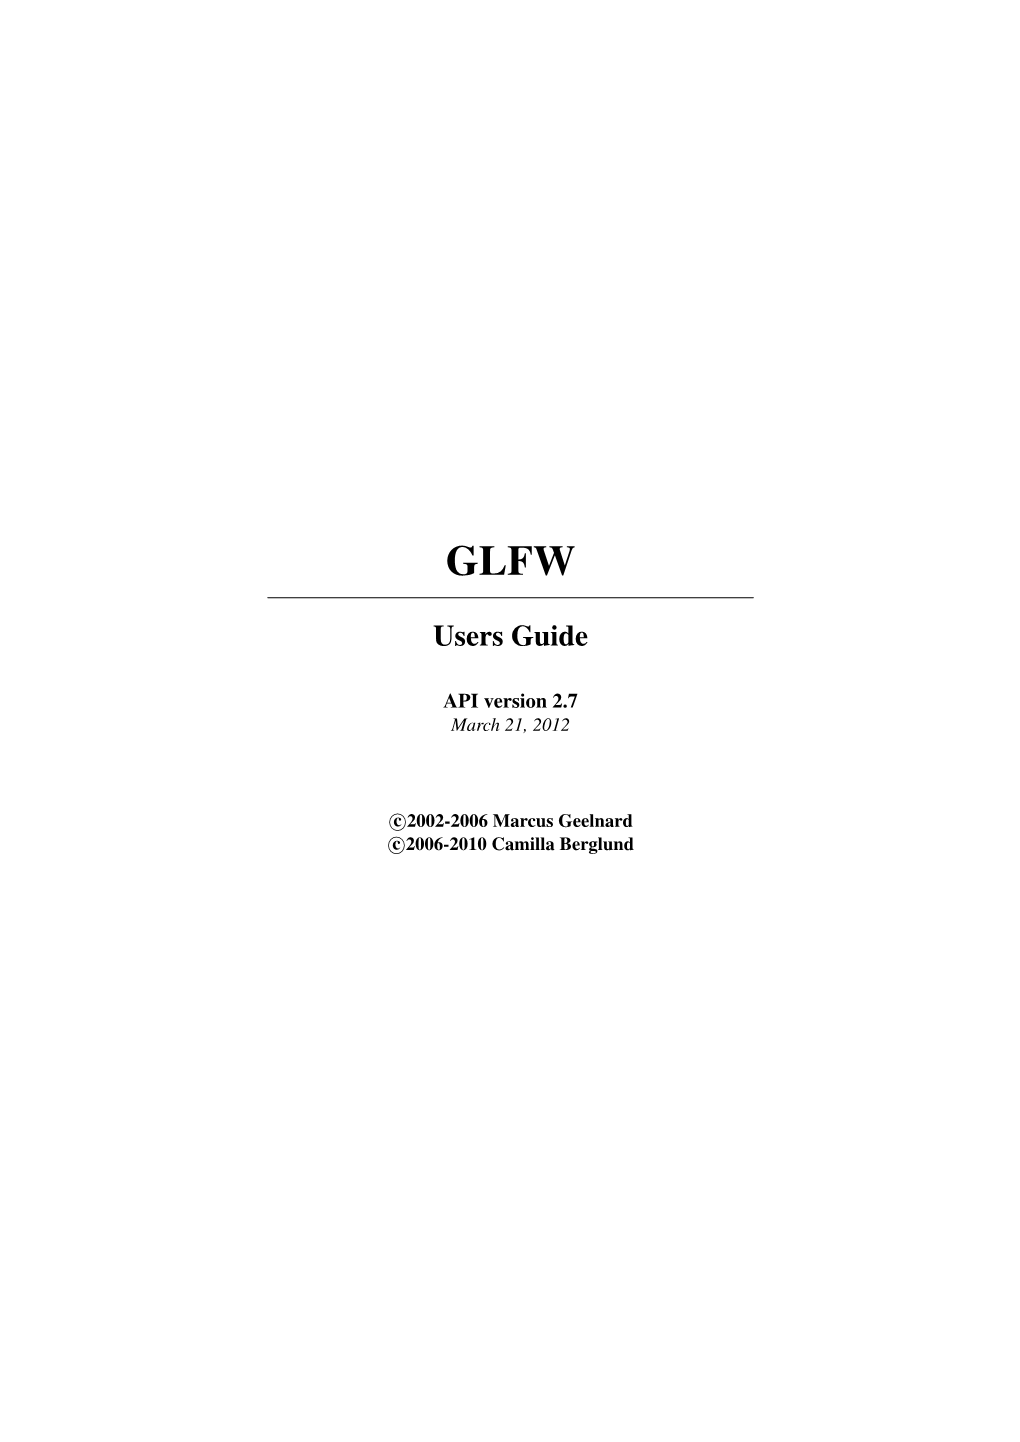 GLFW Users Guide API Version 2.7 Page 1/40